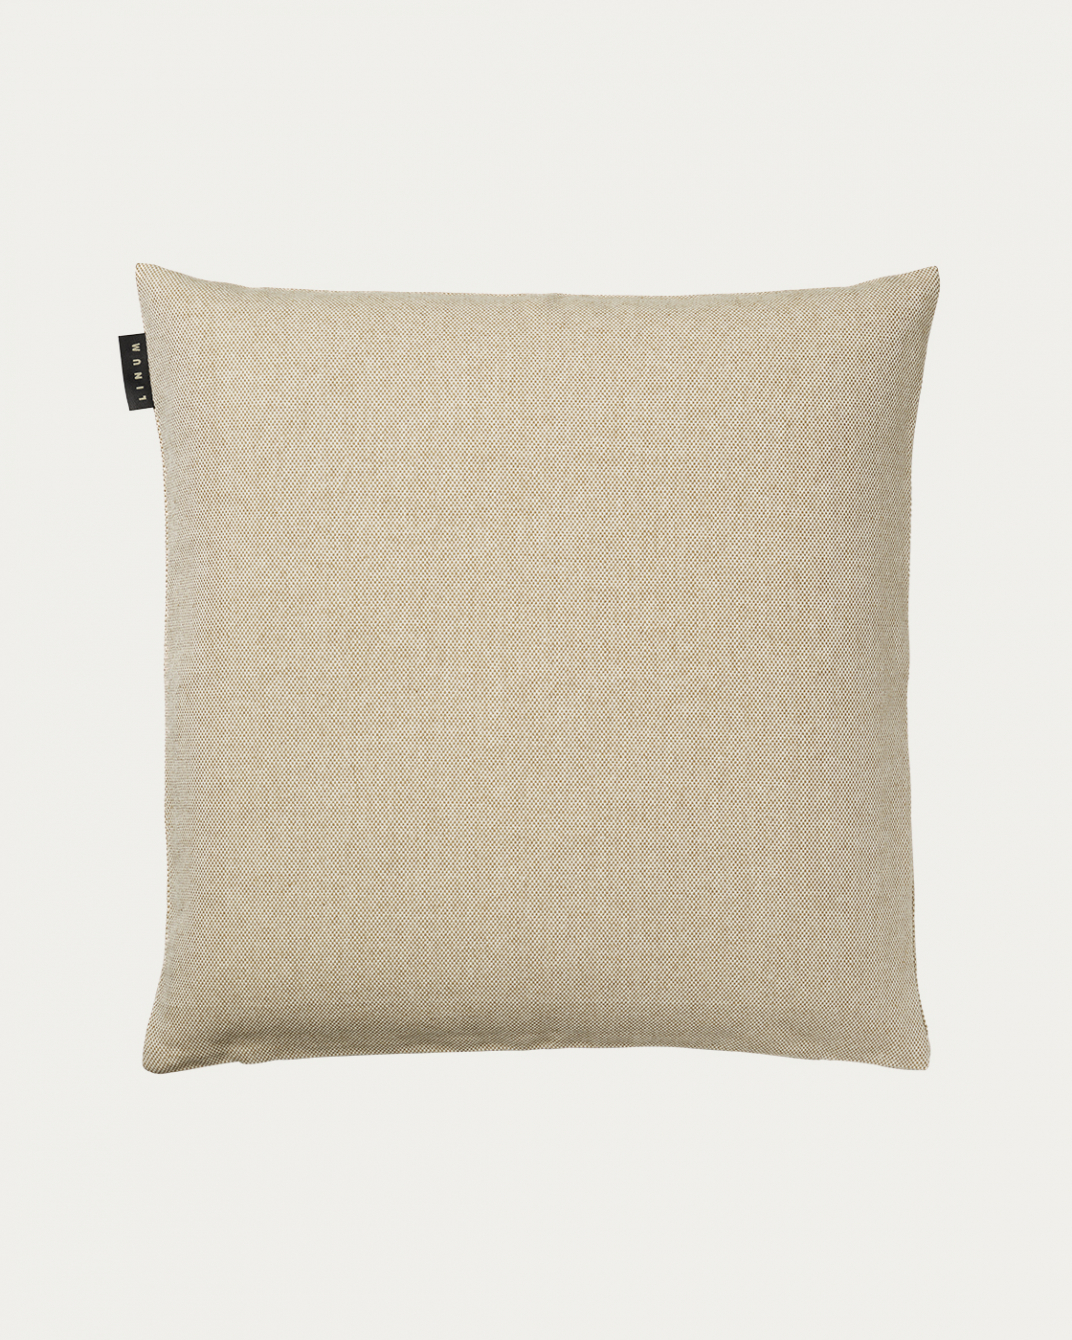 Product image bronze brown PEPPER cushion cover made of soft cotton from LINUM DESIGN. Easy to wash and durable for generations. Size 50x50 cm.